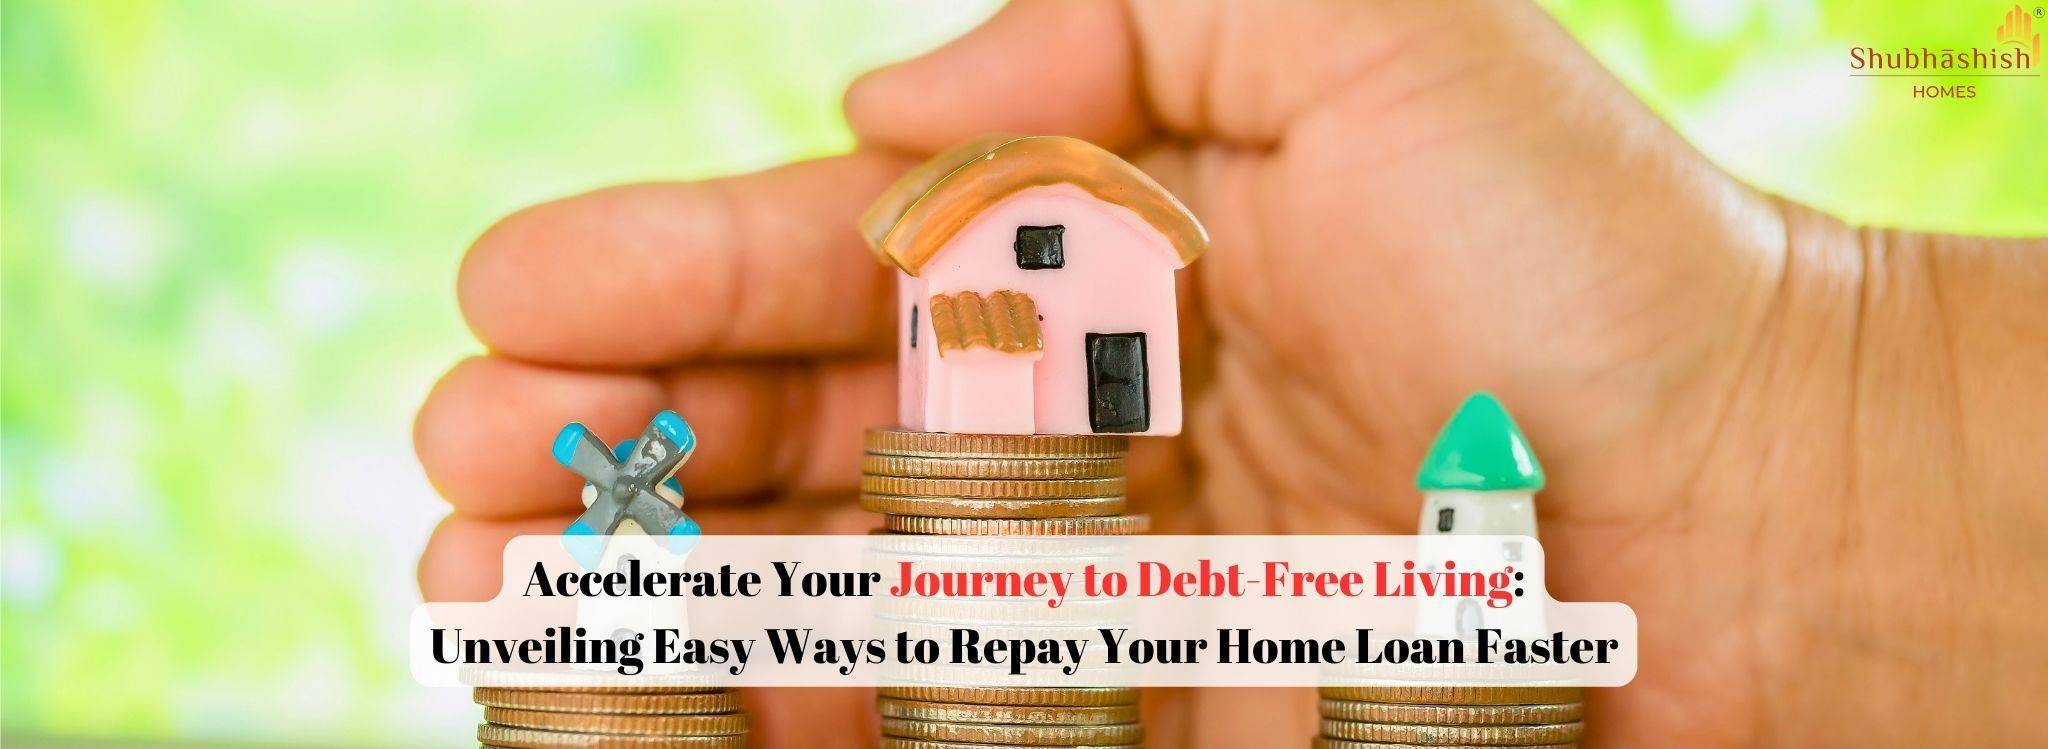 Accelerate Your Journey to Debt-Free Living: Unveiling Easy Ways to Repay Your Home Loan Faster